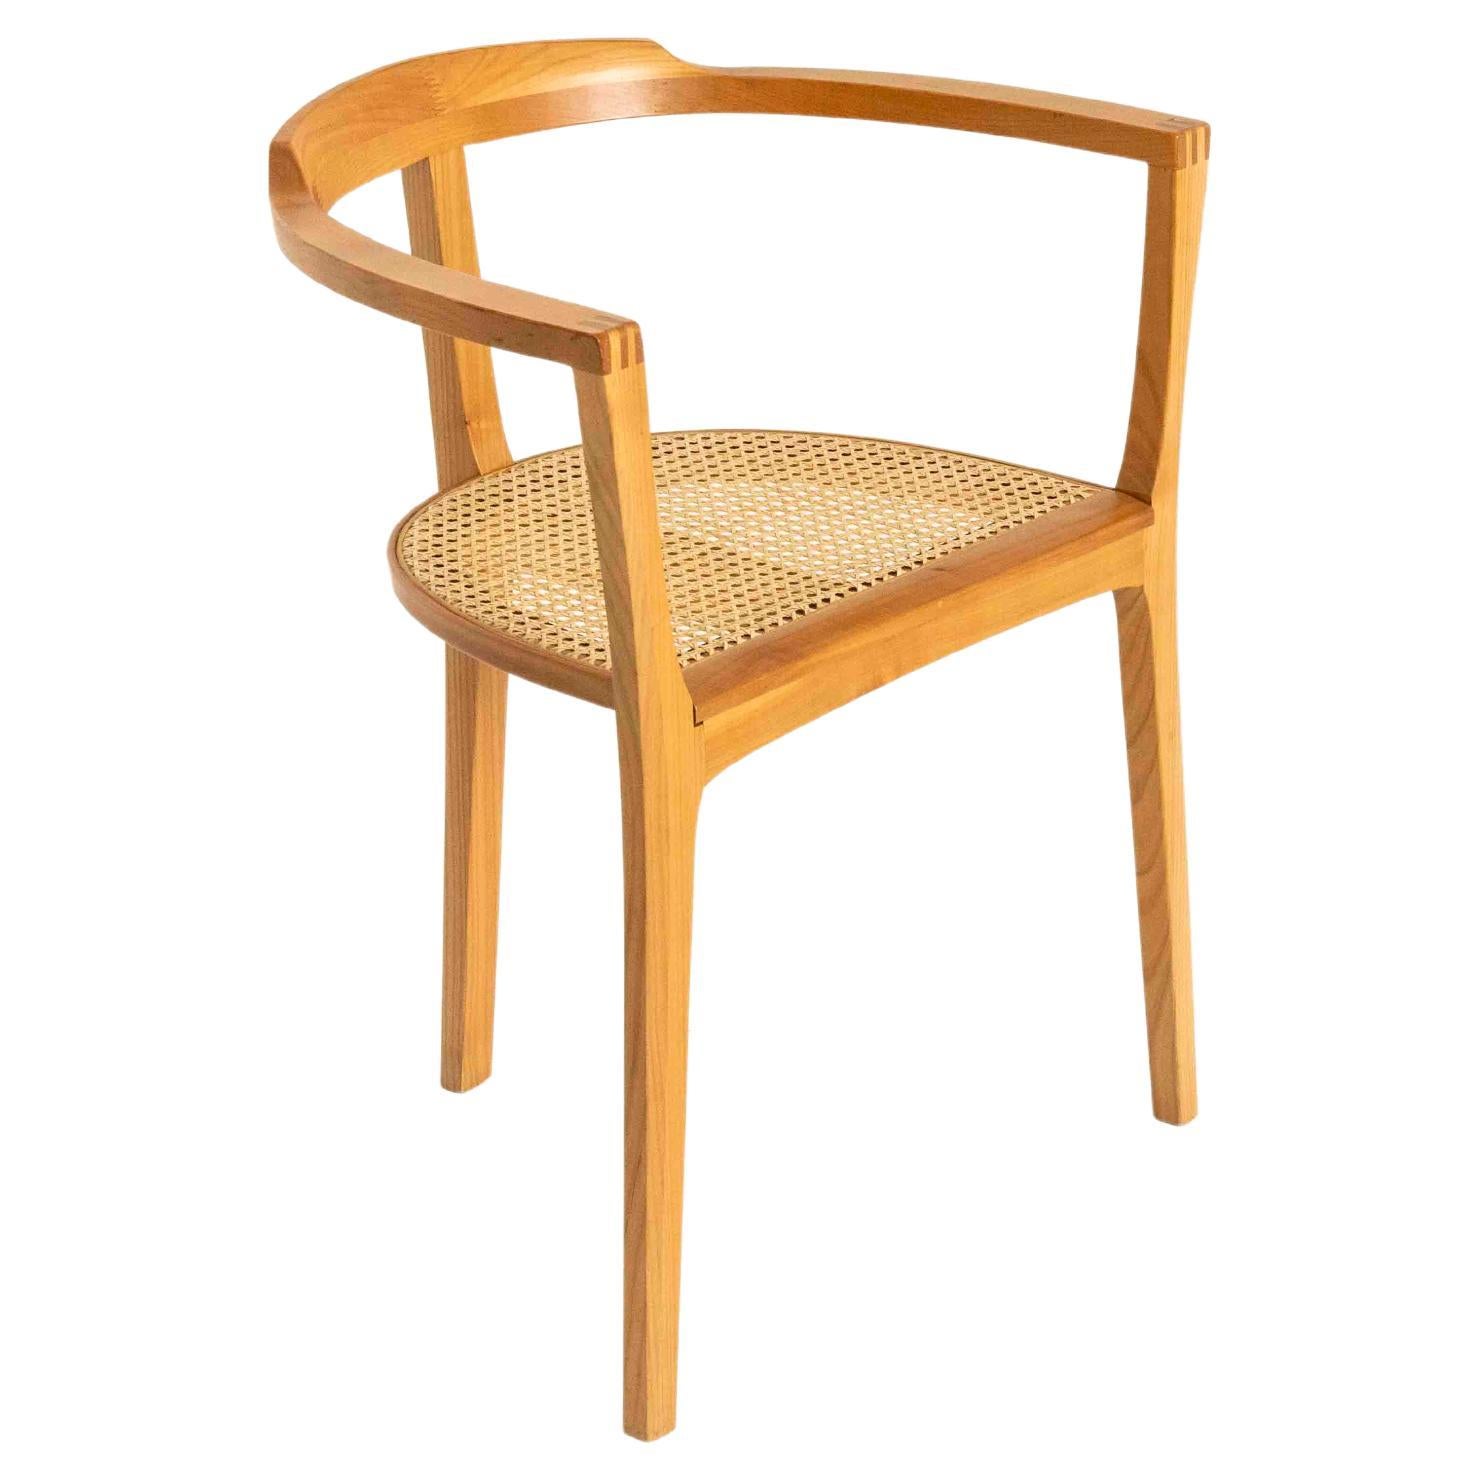 Three-legged Chair by Xaver Seemüller in Wood and Cane, Germany